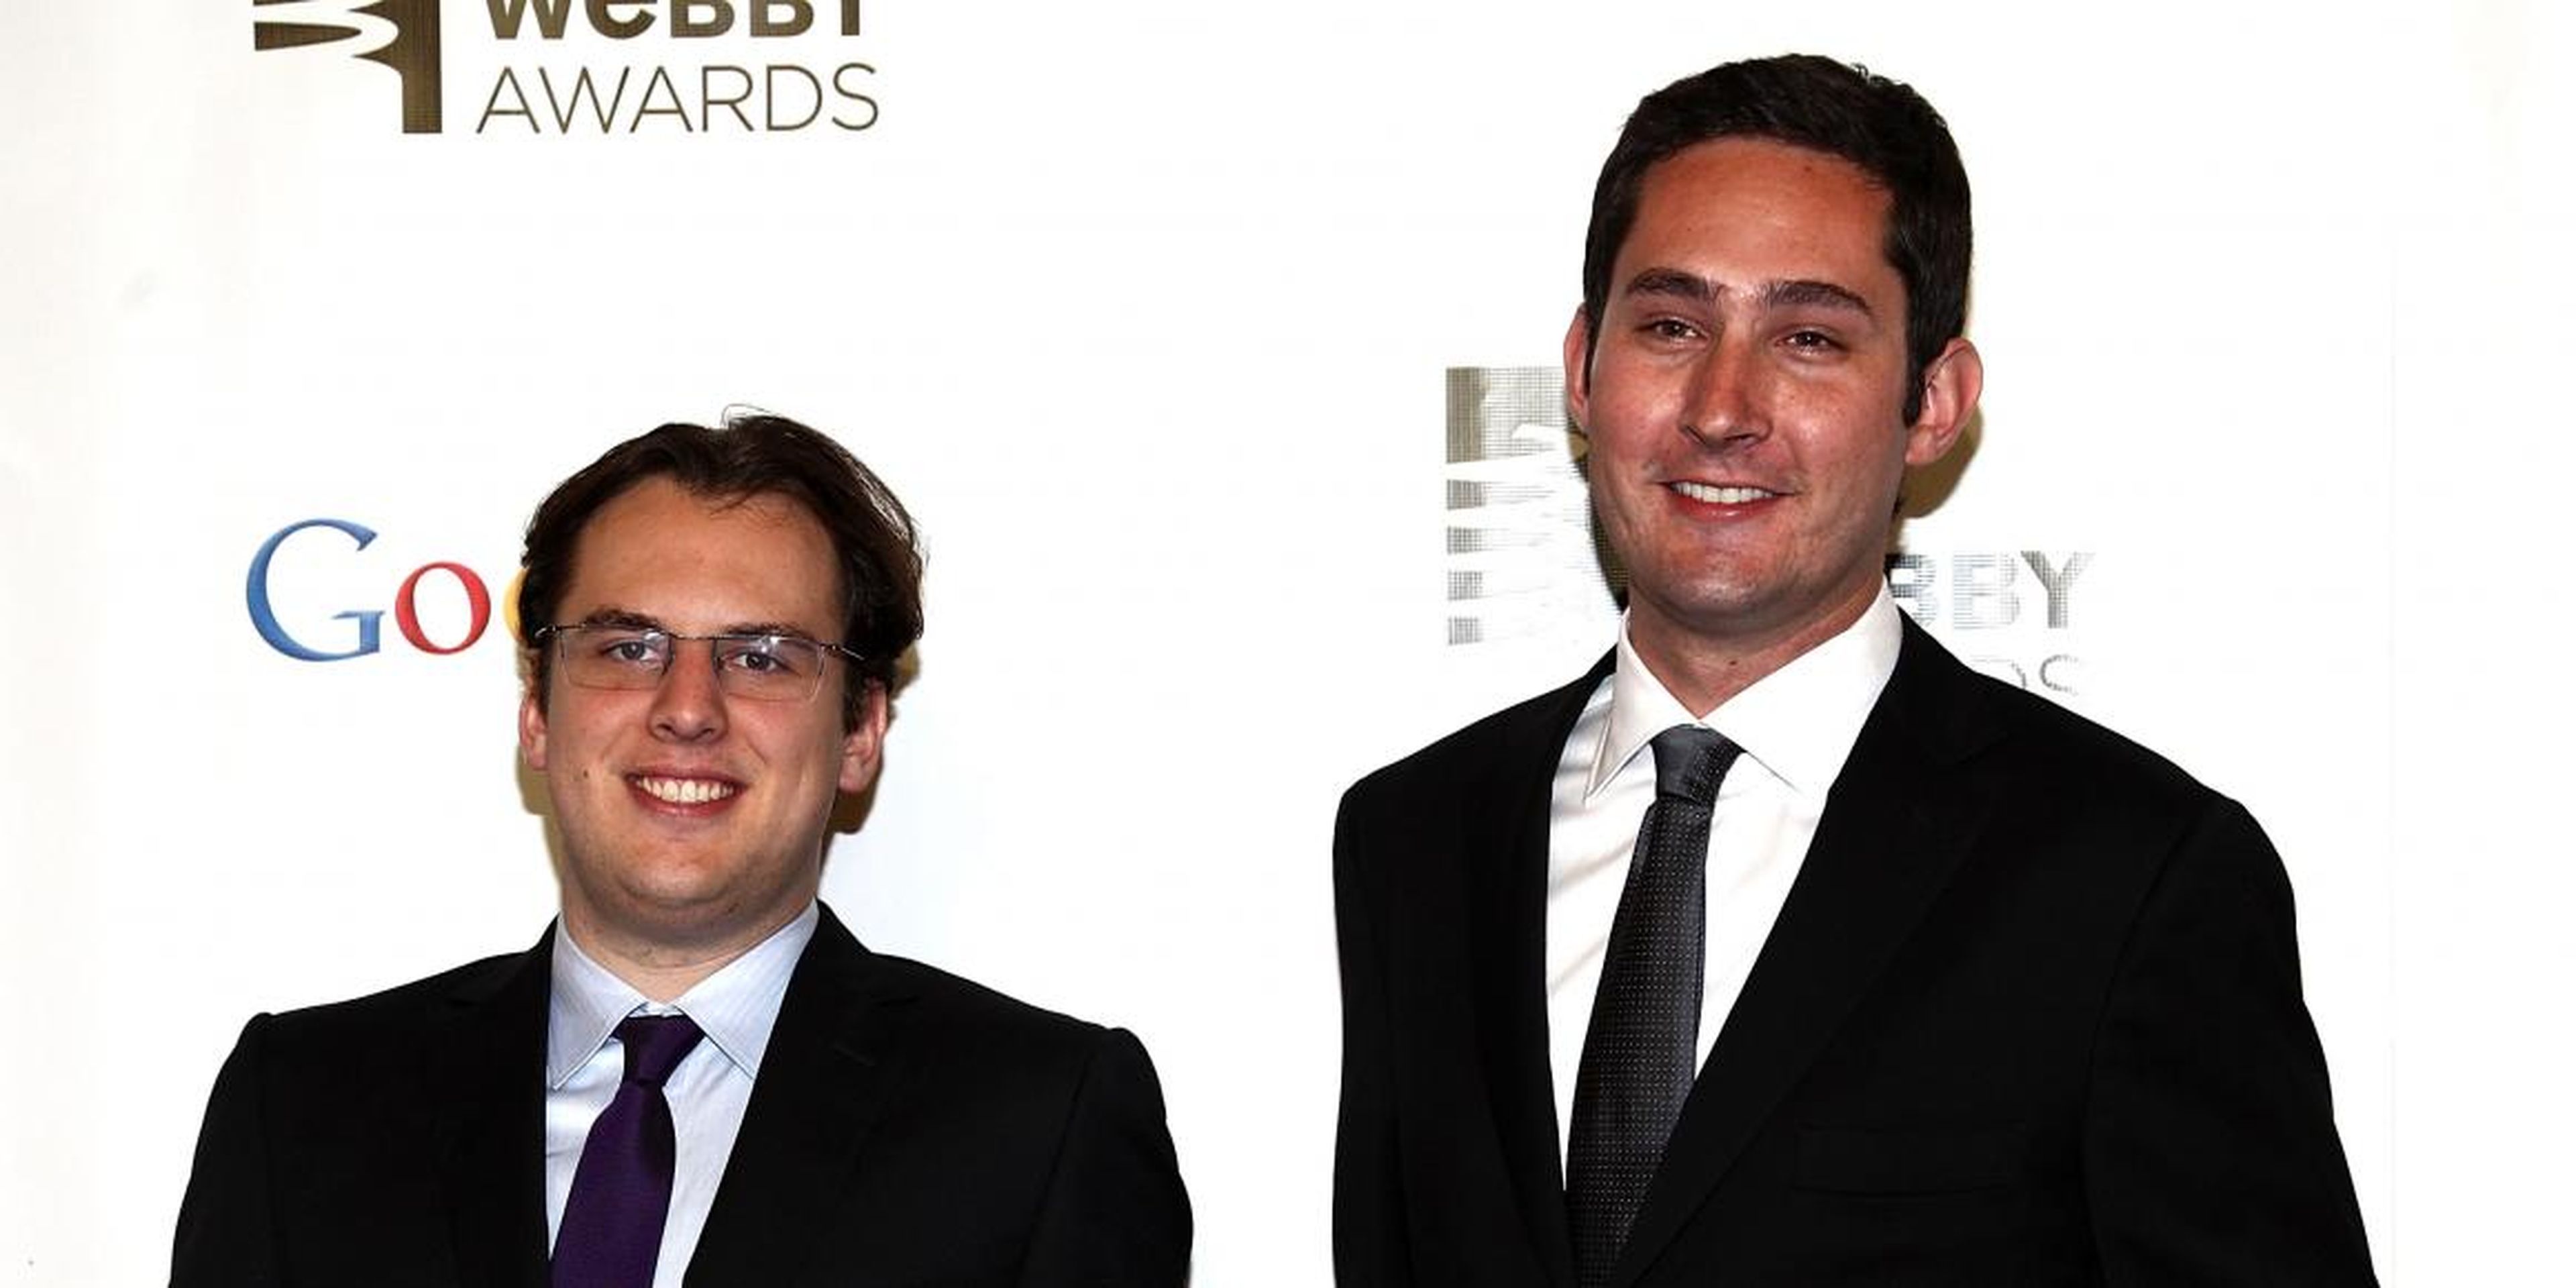 Instagram cofounders Mike Krieger and Kevin Systrom attend the 16th Annual Webby Awards at Hammerstein Ballroom on May 21, 2012 in New York City.